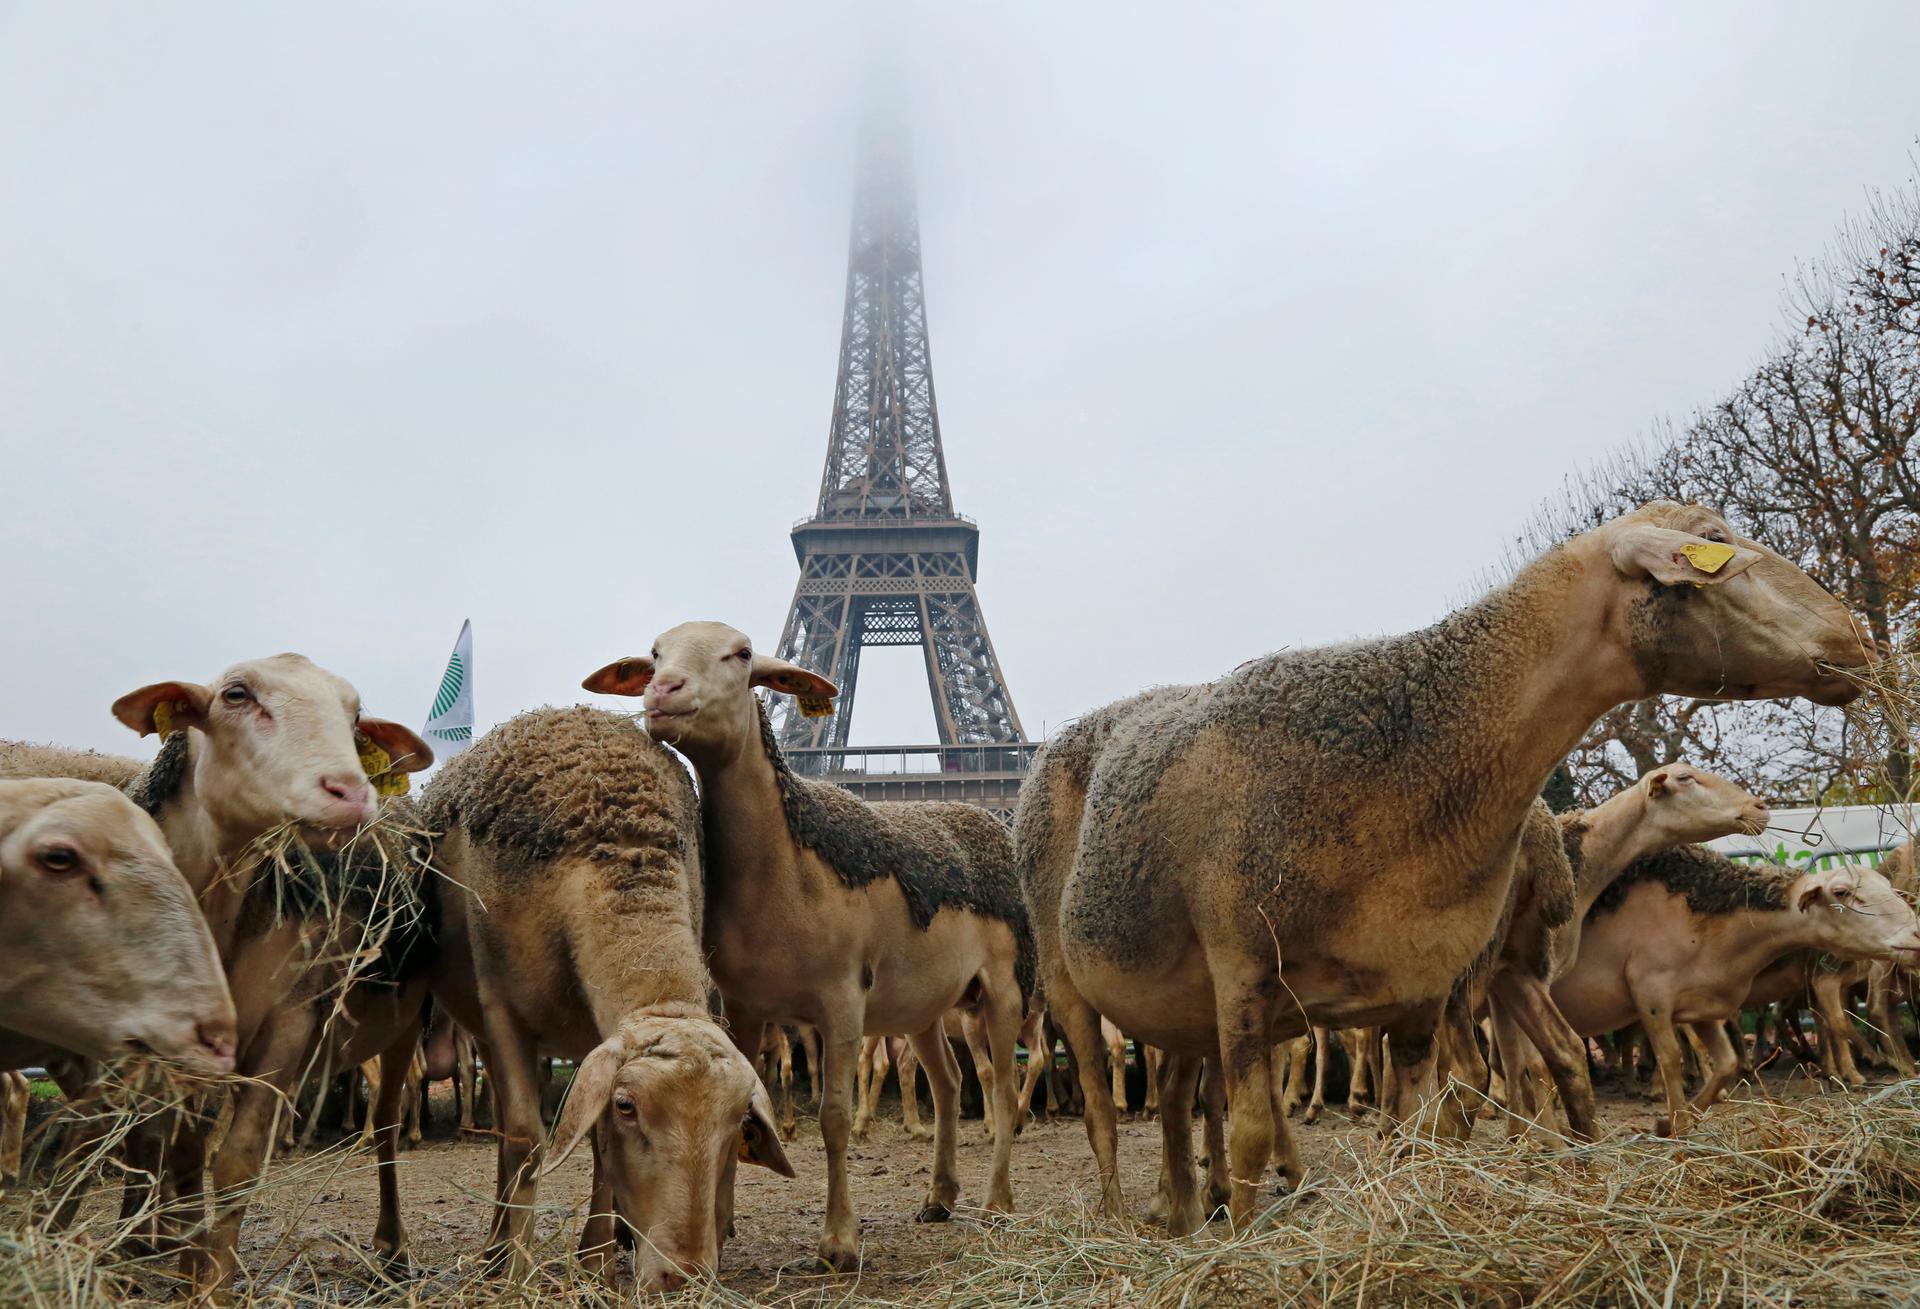 Sheep are gathered in front of the Eiffel tower in Paris